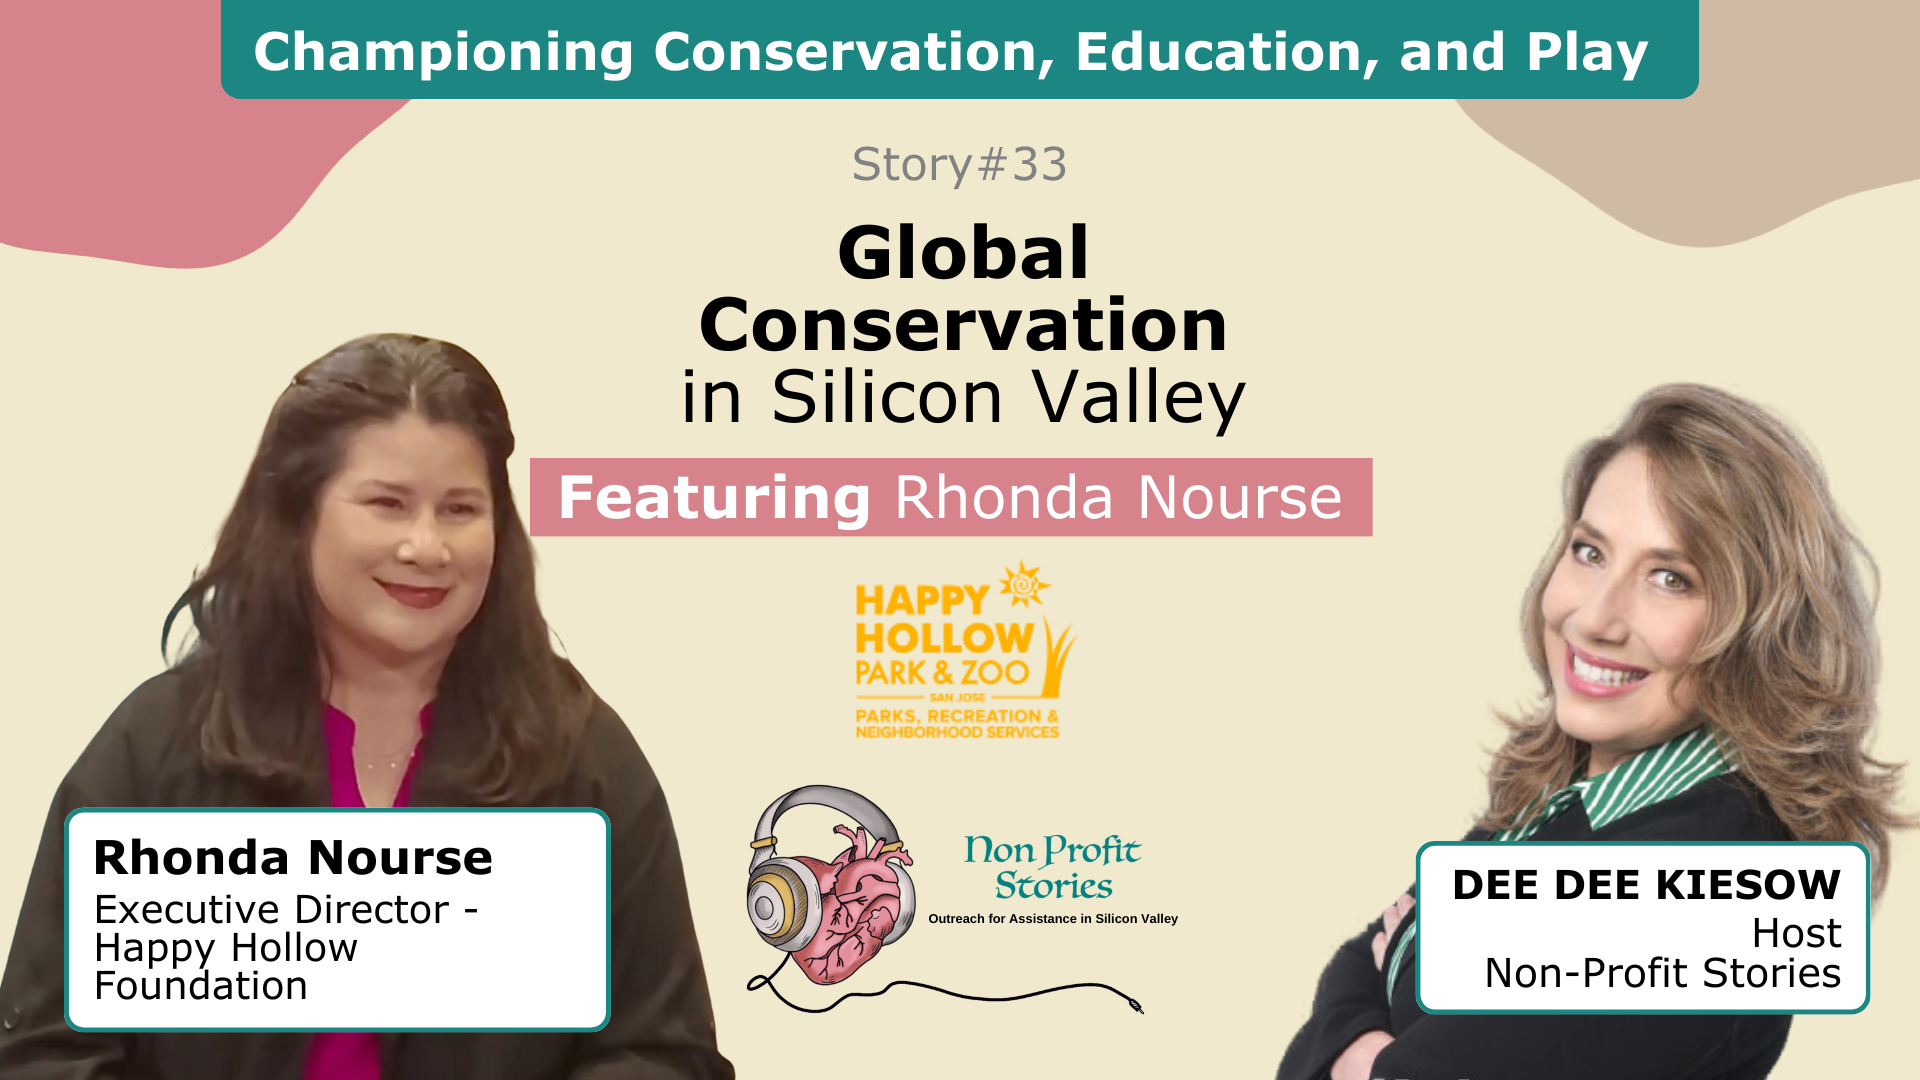 Global Conservation: Championing Conservation, Education, and Play in Silicon Valley Video